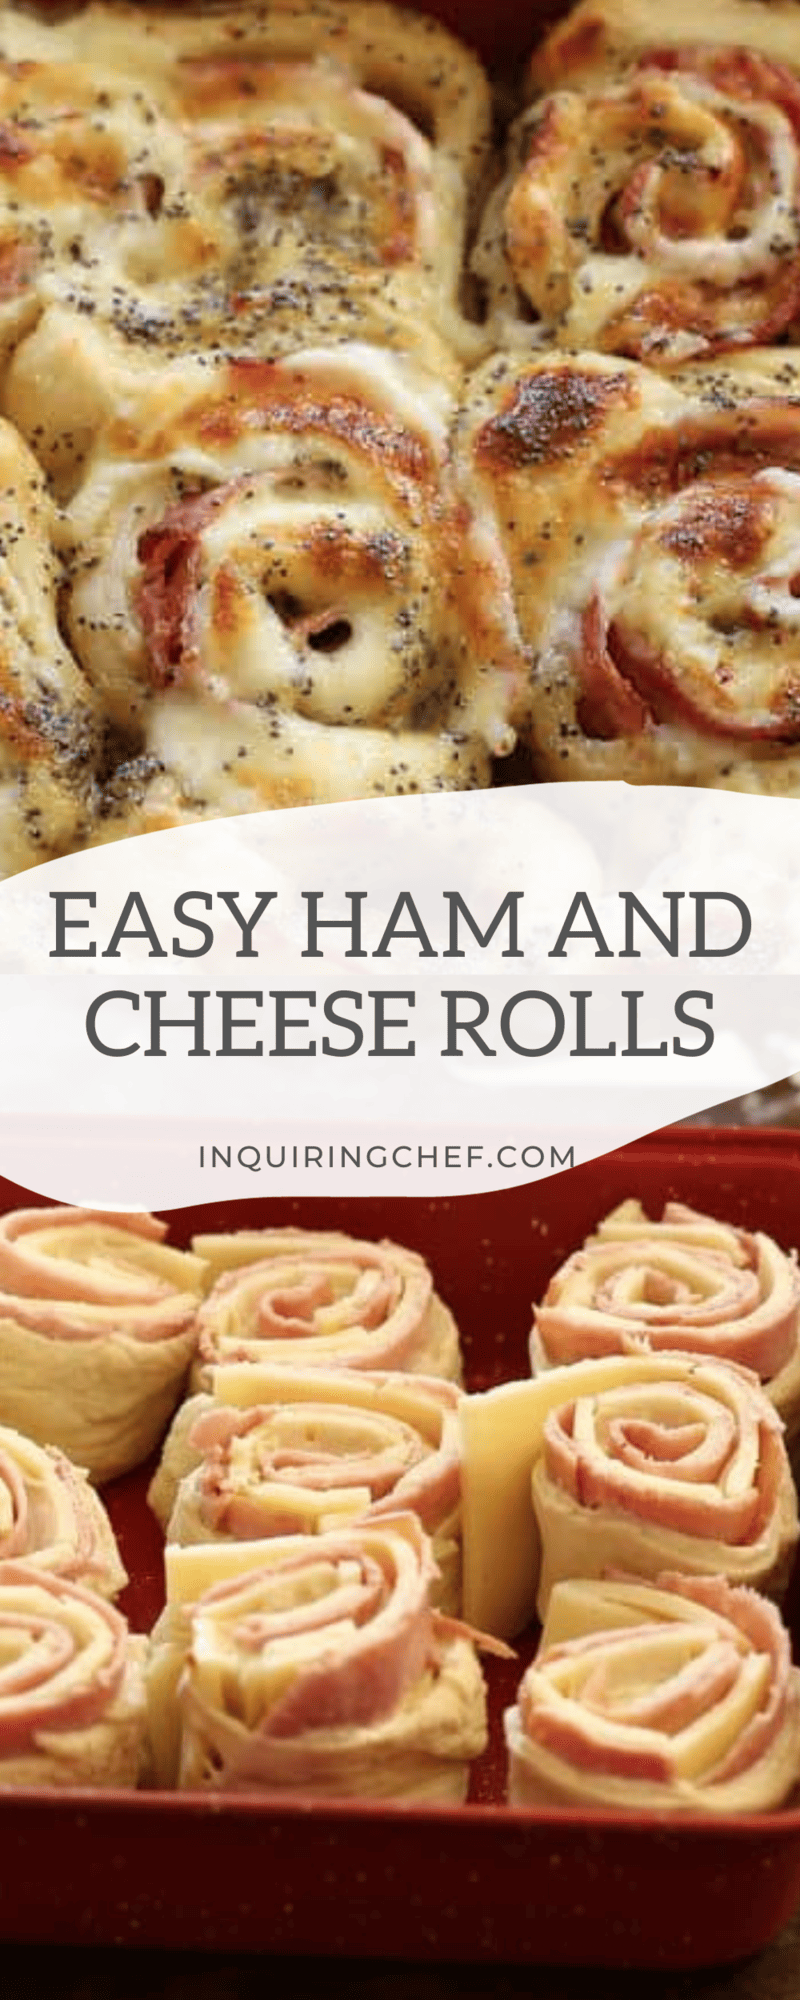 ham and cheese rolls